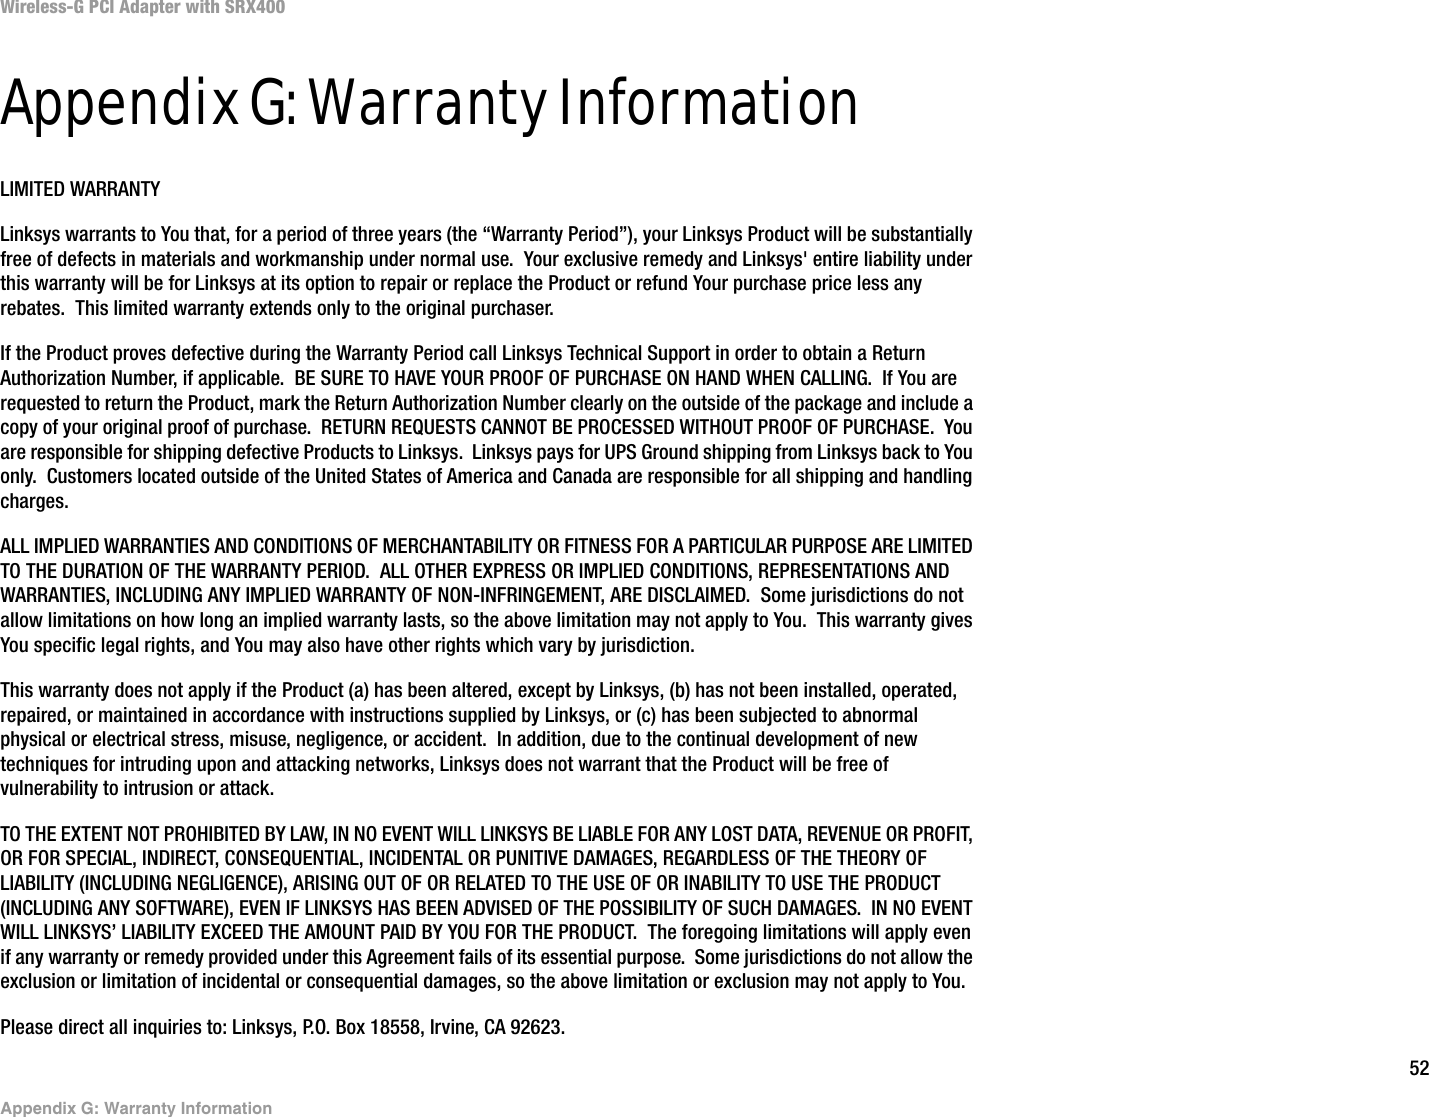 52Appendix G: Warranty InformationWireless-G PCI Adapter with SRX400Appendix G: Warranty InformationLIMITED WARRANTYLinksys warrants to You that, for a period of three years (the “Warranty Period”), your Linksys Product will be substantially free of defects in materials and workmanship under normal use.  Your exclusive remedy and Linksys&apos; entire liability under this warranty will be for Linksys at its option to repair or replace the Product or refund Your purchase price less any rebates.  This limited warranty extends only to the original purchaser.  If the Product proves defective during the Warranty Period call Linksys Technical Support in order to obtain a Return Authorization Number, if applicable.  BE SURE TO HAVE YOUR PROOF OF PURCHASE ON HAND WHEN CALLING.  If You are requested to return the Product, mark the Return Authorization Number clearly on the outside of the package and include a copy of your original proof of purchase.  RETURN REQUESTS CANNOT BE PROCESSED WITHOUT PROOF OF PURCHASE.  You are responsible for shipping defective Products to Linksys.  Linksys pays for UPS Ground shipping from Linksys back to You only.  Customers located outside of the United States of America and Canada are responsible for all shipping and handling charges. ALL IMPLIED WARRANTIES AND CONDITIONS OF MERCHANTABILITY OR FITNESS FOR A PARTICULAR PURPOSE ARE LIMITED TO THE DURATION OF THE WARRANTY PERIOD.  ALL OTHER EXPRESS OR IMPLIED CONDITIONS, REPRESENTATIONS AND WARRANTIES, INCLUDING ANY IMPLIED WARRANTY OF NON-INFRINGEMENT, ARE DISCLAIMED.  Some jurisdictions do not allow limitations on how long an implied warranty lasts, so the above limitation may not apply to You.  This warranty gives You specific legal rights, and You may also have other rights which vary by jurisdiction.This warranty does not apply if the Product (a) has been altered, except by Linksys, (b) has not been installed, operated, repaired, or maintained in accordance with instructions supplied by Linksys, or (c) has been subjected to abnormal physical or electrical stress, misuse, negligence, or accident.  In addition, due to the continual development of new techniques for intruding upon and attacking networks, Linksys does not warrant that the Product will be free of vulnerability to intrusion or attack.TO THE EXTENT NOT PROHIBITED BY LAW, IN NO EVENT WILL LINKSYS BE LIABLE FOR ANY LOST DATA, REVENUE OR PROFIT, OR FOR SPECIAL, INDIRECT, CONSEQUENTIAL, INCIDENTAL OR PUNITIVE DAMAGES, REGARDLESS OF THE THEORY OF LIABILITY (INCLUDING NEGLIGENCE), ARISING OUT OF OR RELATED TO THE USE OF OR INABILITY TO USE THE PRODUCT (INCLUDING ANY SOFTWARE), EVEN IF LINKSYS HAS BEEN ADVISED OF THE POSSIBILITY OF SUCH DAMAGES.  IN NO EVENT WILL LINKSYS’ LIABILITY EXCEED THE AMOUNT PAID BY YOU FOR THE PRODUCT.  The foregoing limitations will apply even if any warranty or remedy provided under this Agreement fails of its essential purpose.  Some jurisdictions do not allow the exclusion or limitation of incidental or consequential damages, so the above limitation or exclusion may not apply to You.Please direct all inquiries to: Linksys, P.O. Box 18558, Irvine, CA 92623.